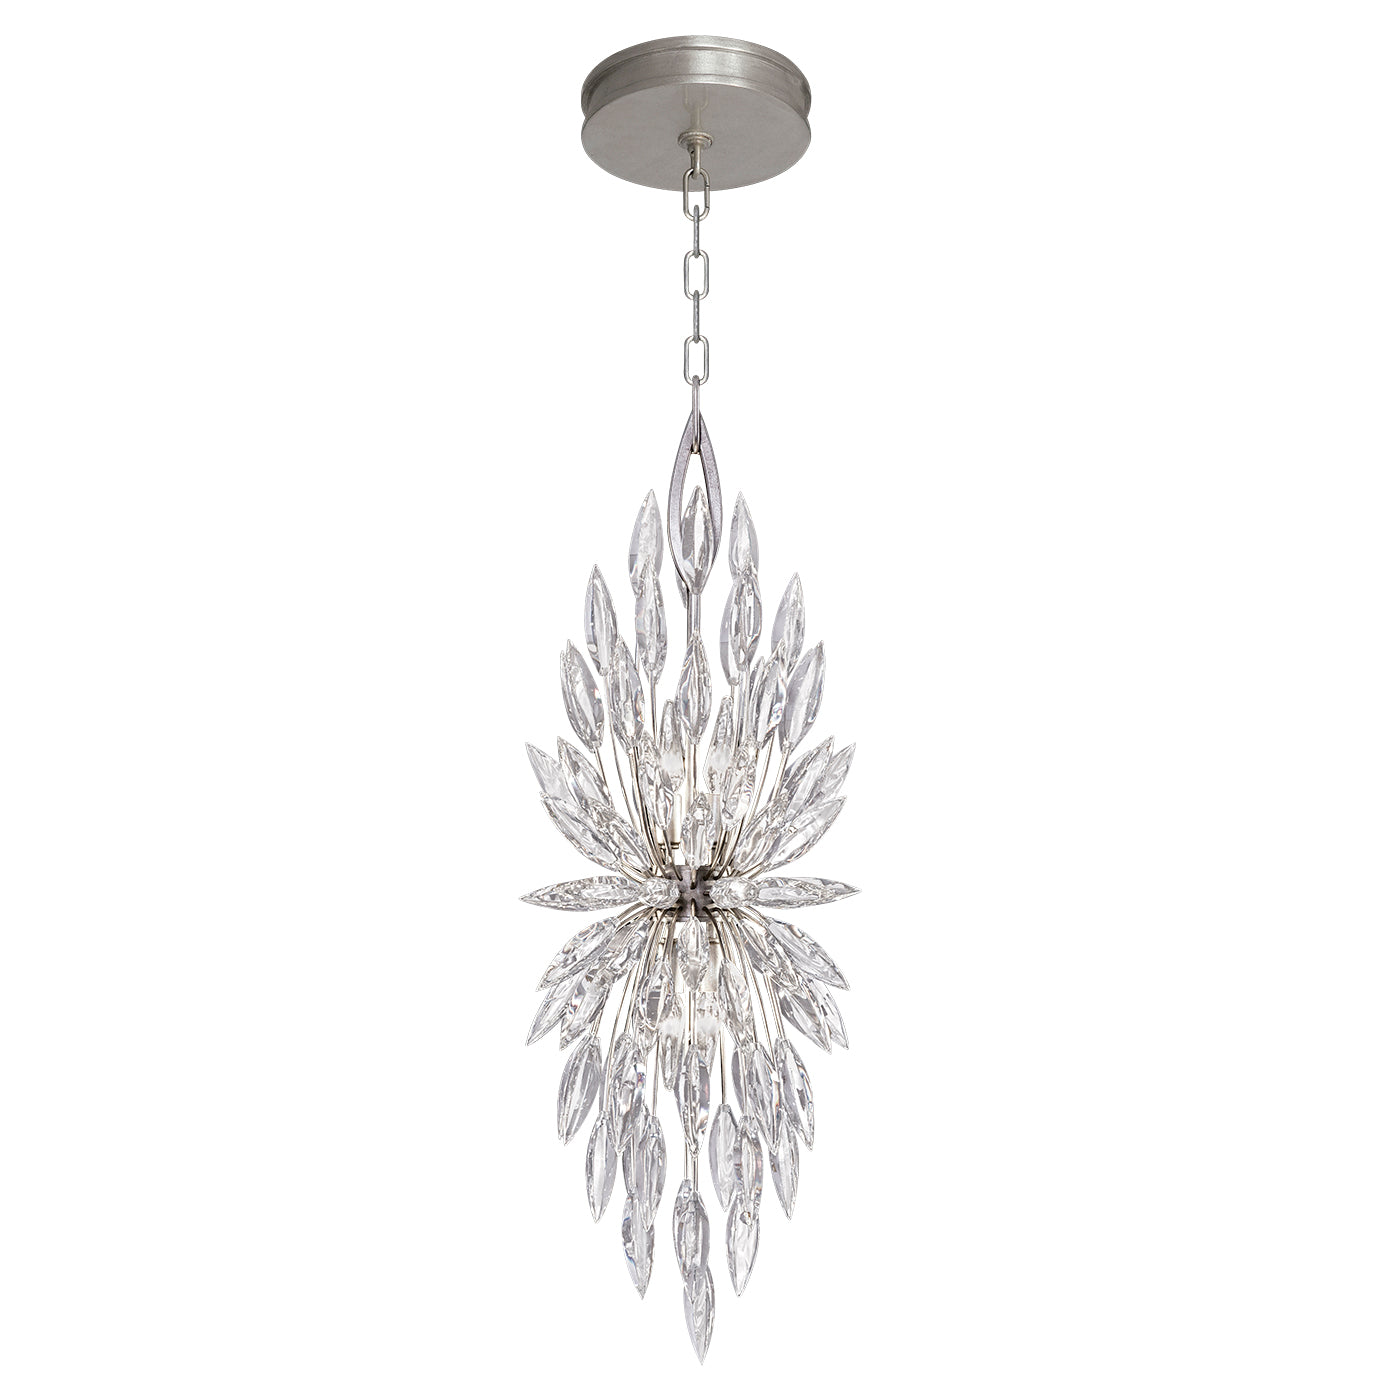 Fine Art Handcrafted Lighting Lily Buds Pendant Chandeliers Fine Art Handcrafted Lighting Silver 13 x 37 